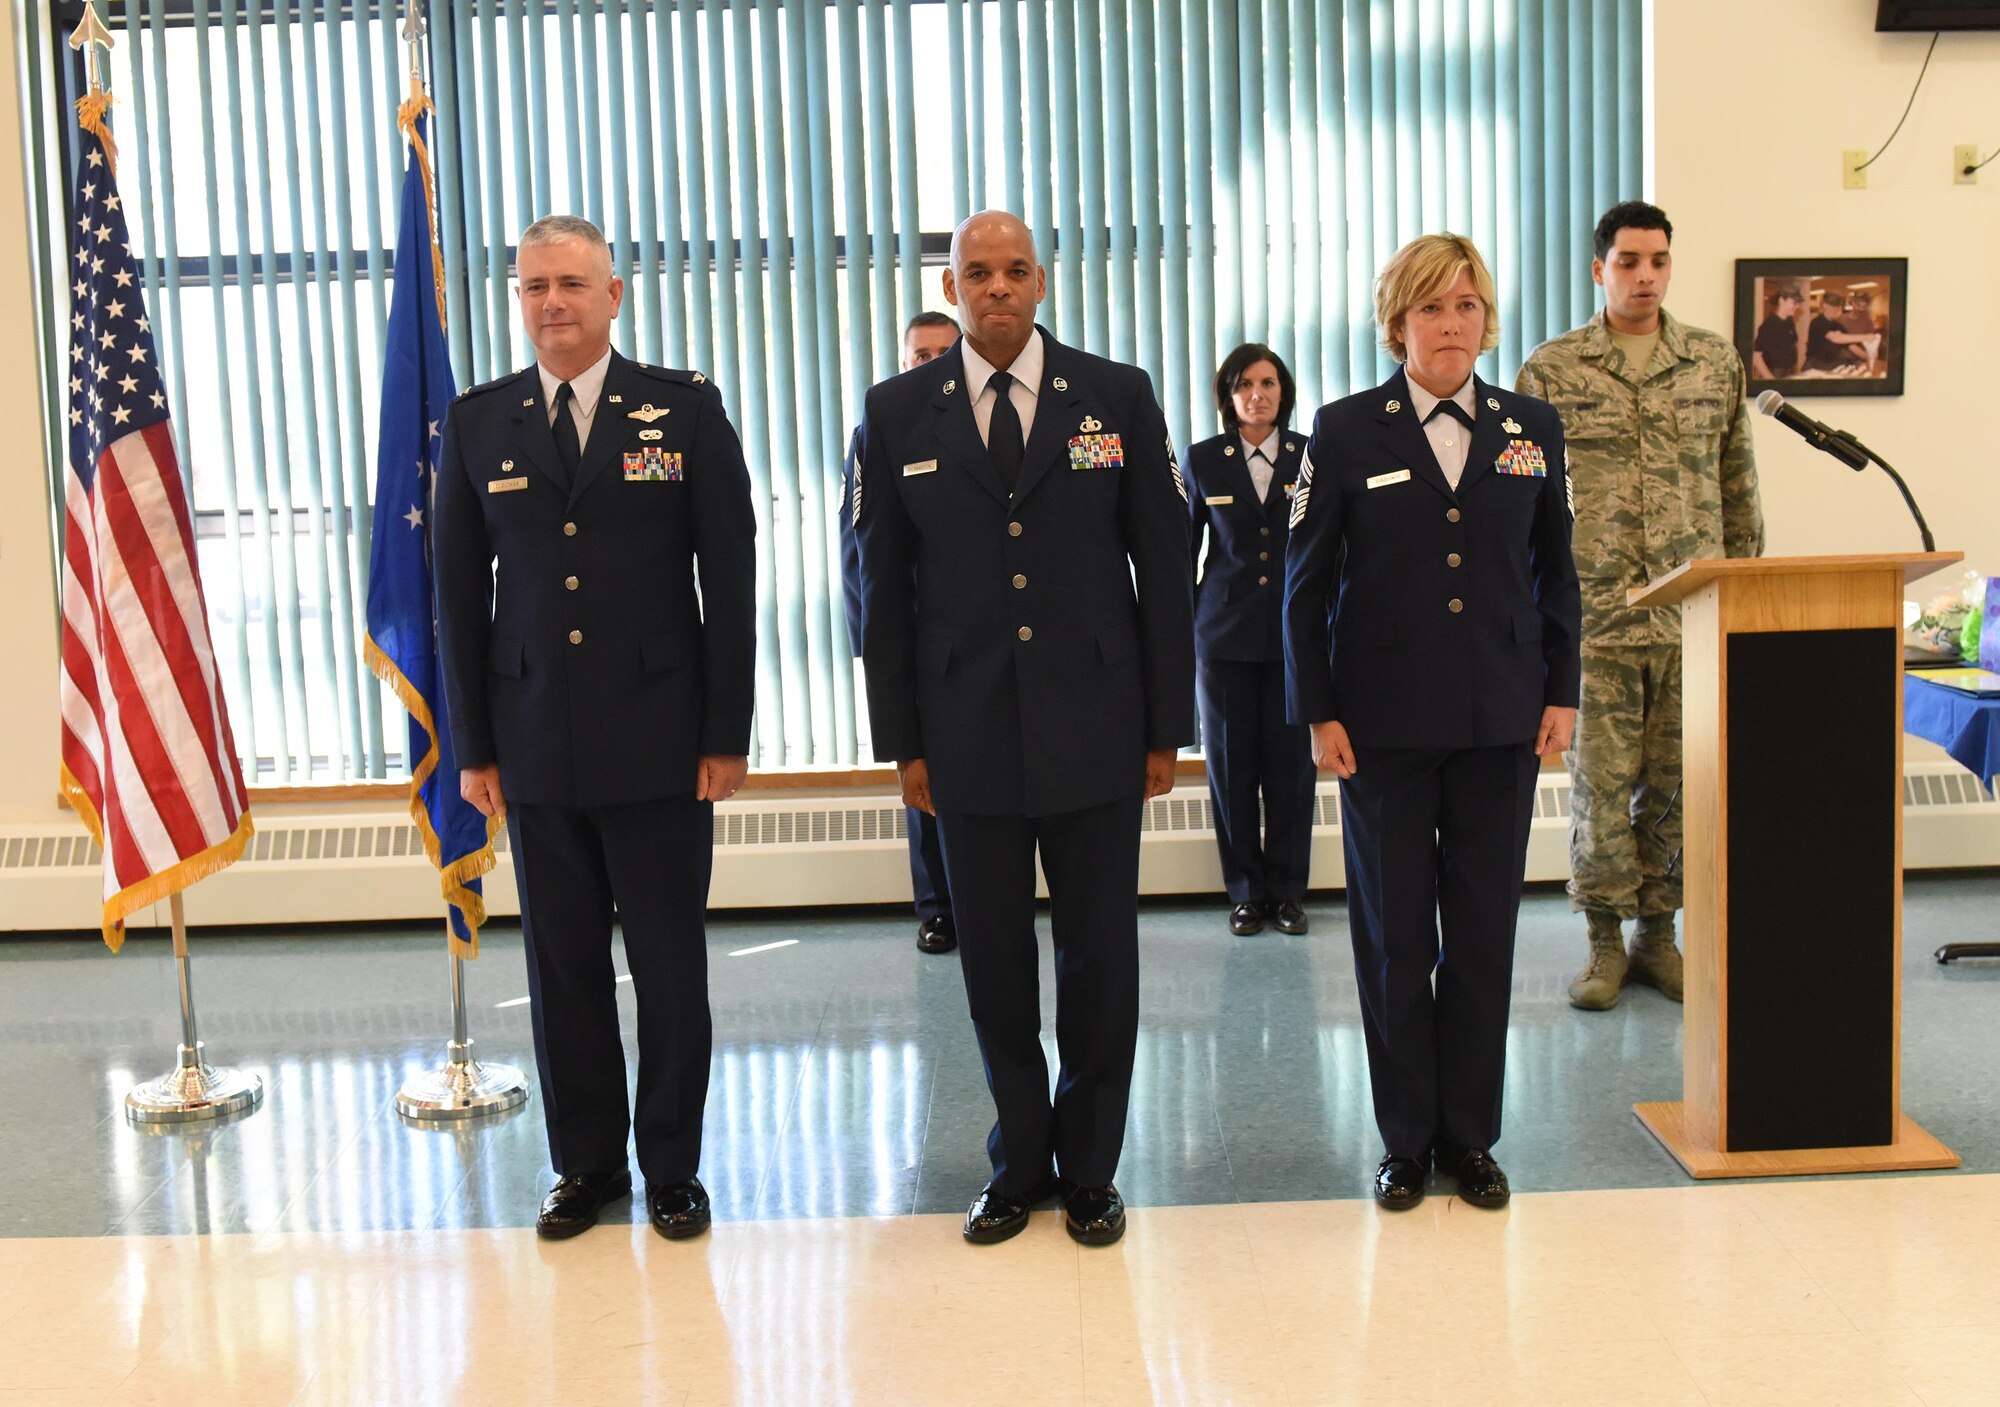 Chief Master Sgt. Denny Richardson (center) assumes the duties of 109th Airlift Wing command chief during a change of authority ceremony at Stratton Air National Guard Base, N.Y., on Oct. 6, 2016. Also pictured are Col. Shawn Clouthier (left), 109th AW commander, and outgoing 109th AW command chief, Chief Master Sgt. Amy Giaquinto. Giaquinto is now the New York Air National Guard command chief. (U.S. Air National Guard photo by Master Sgt. William Gizara/Released)